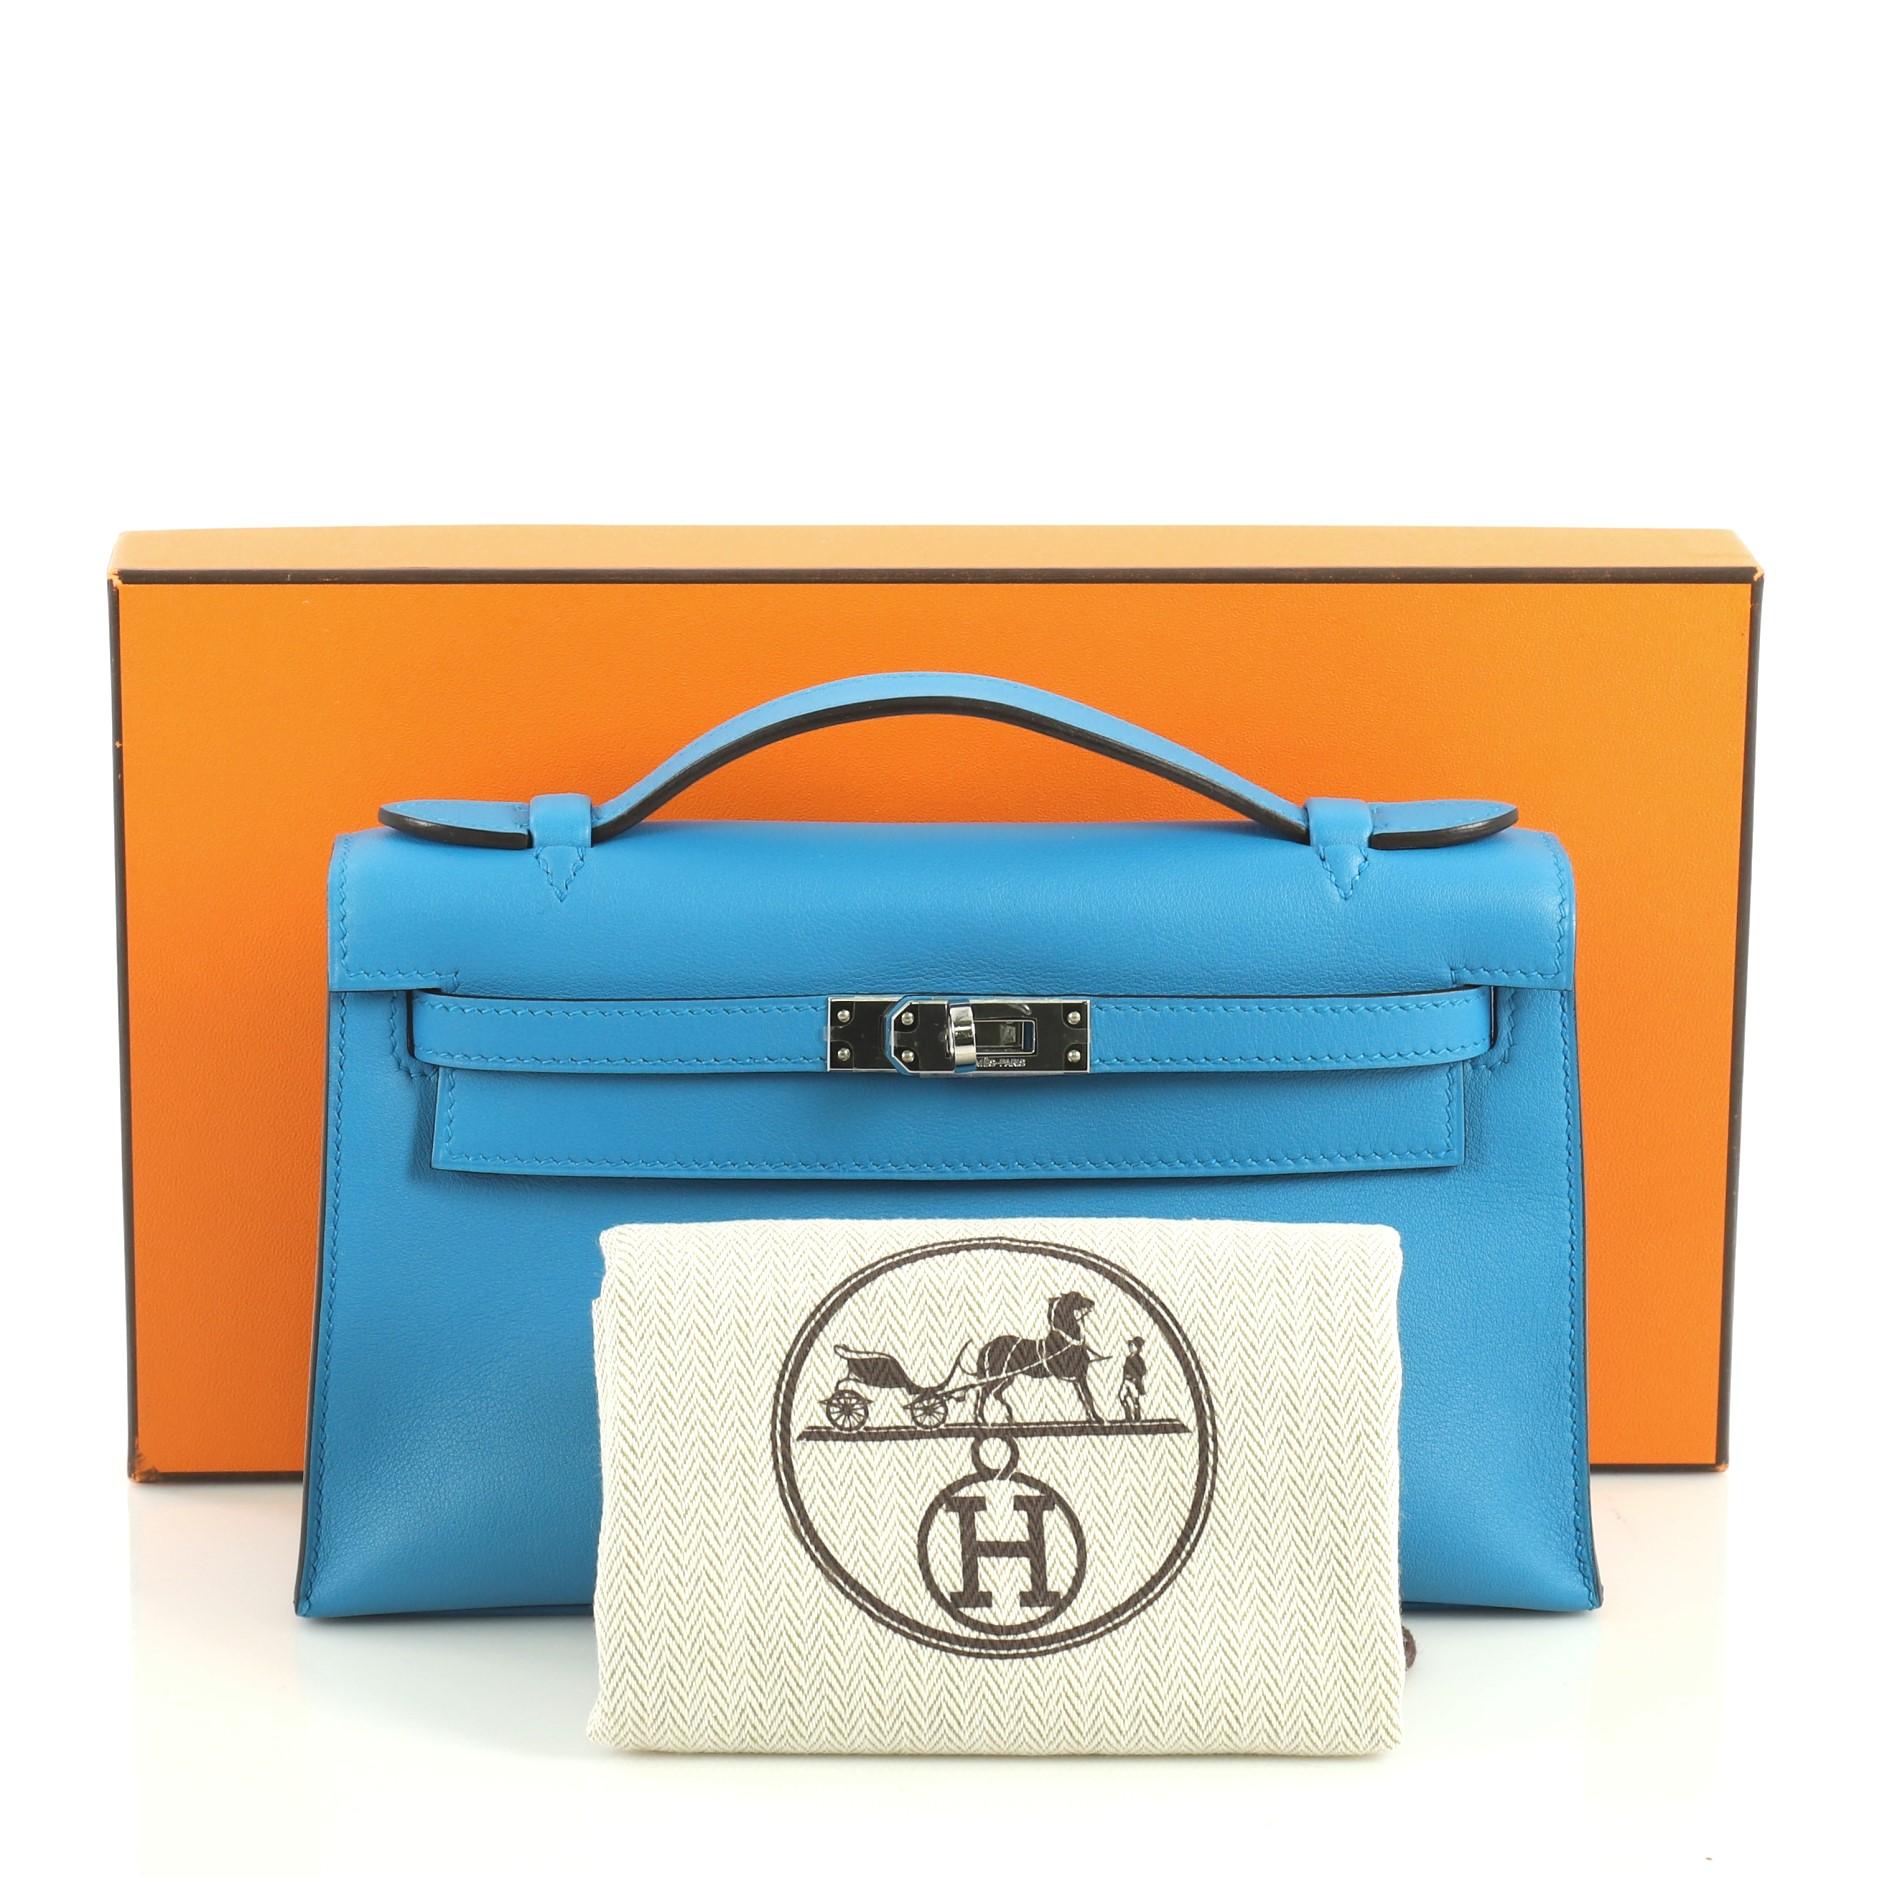 This Hermes Kelly Pochette Swift, crafted in Bleu Zanzibar blue Swift leather, features top flat handle, frontal flap, and palladium hardware. Its turn-lock closure opens to a Bleu Zanzibar blue Swift leather interior with slip pocket. Date stamp